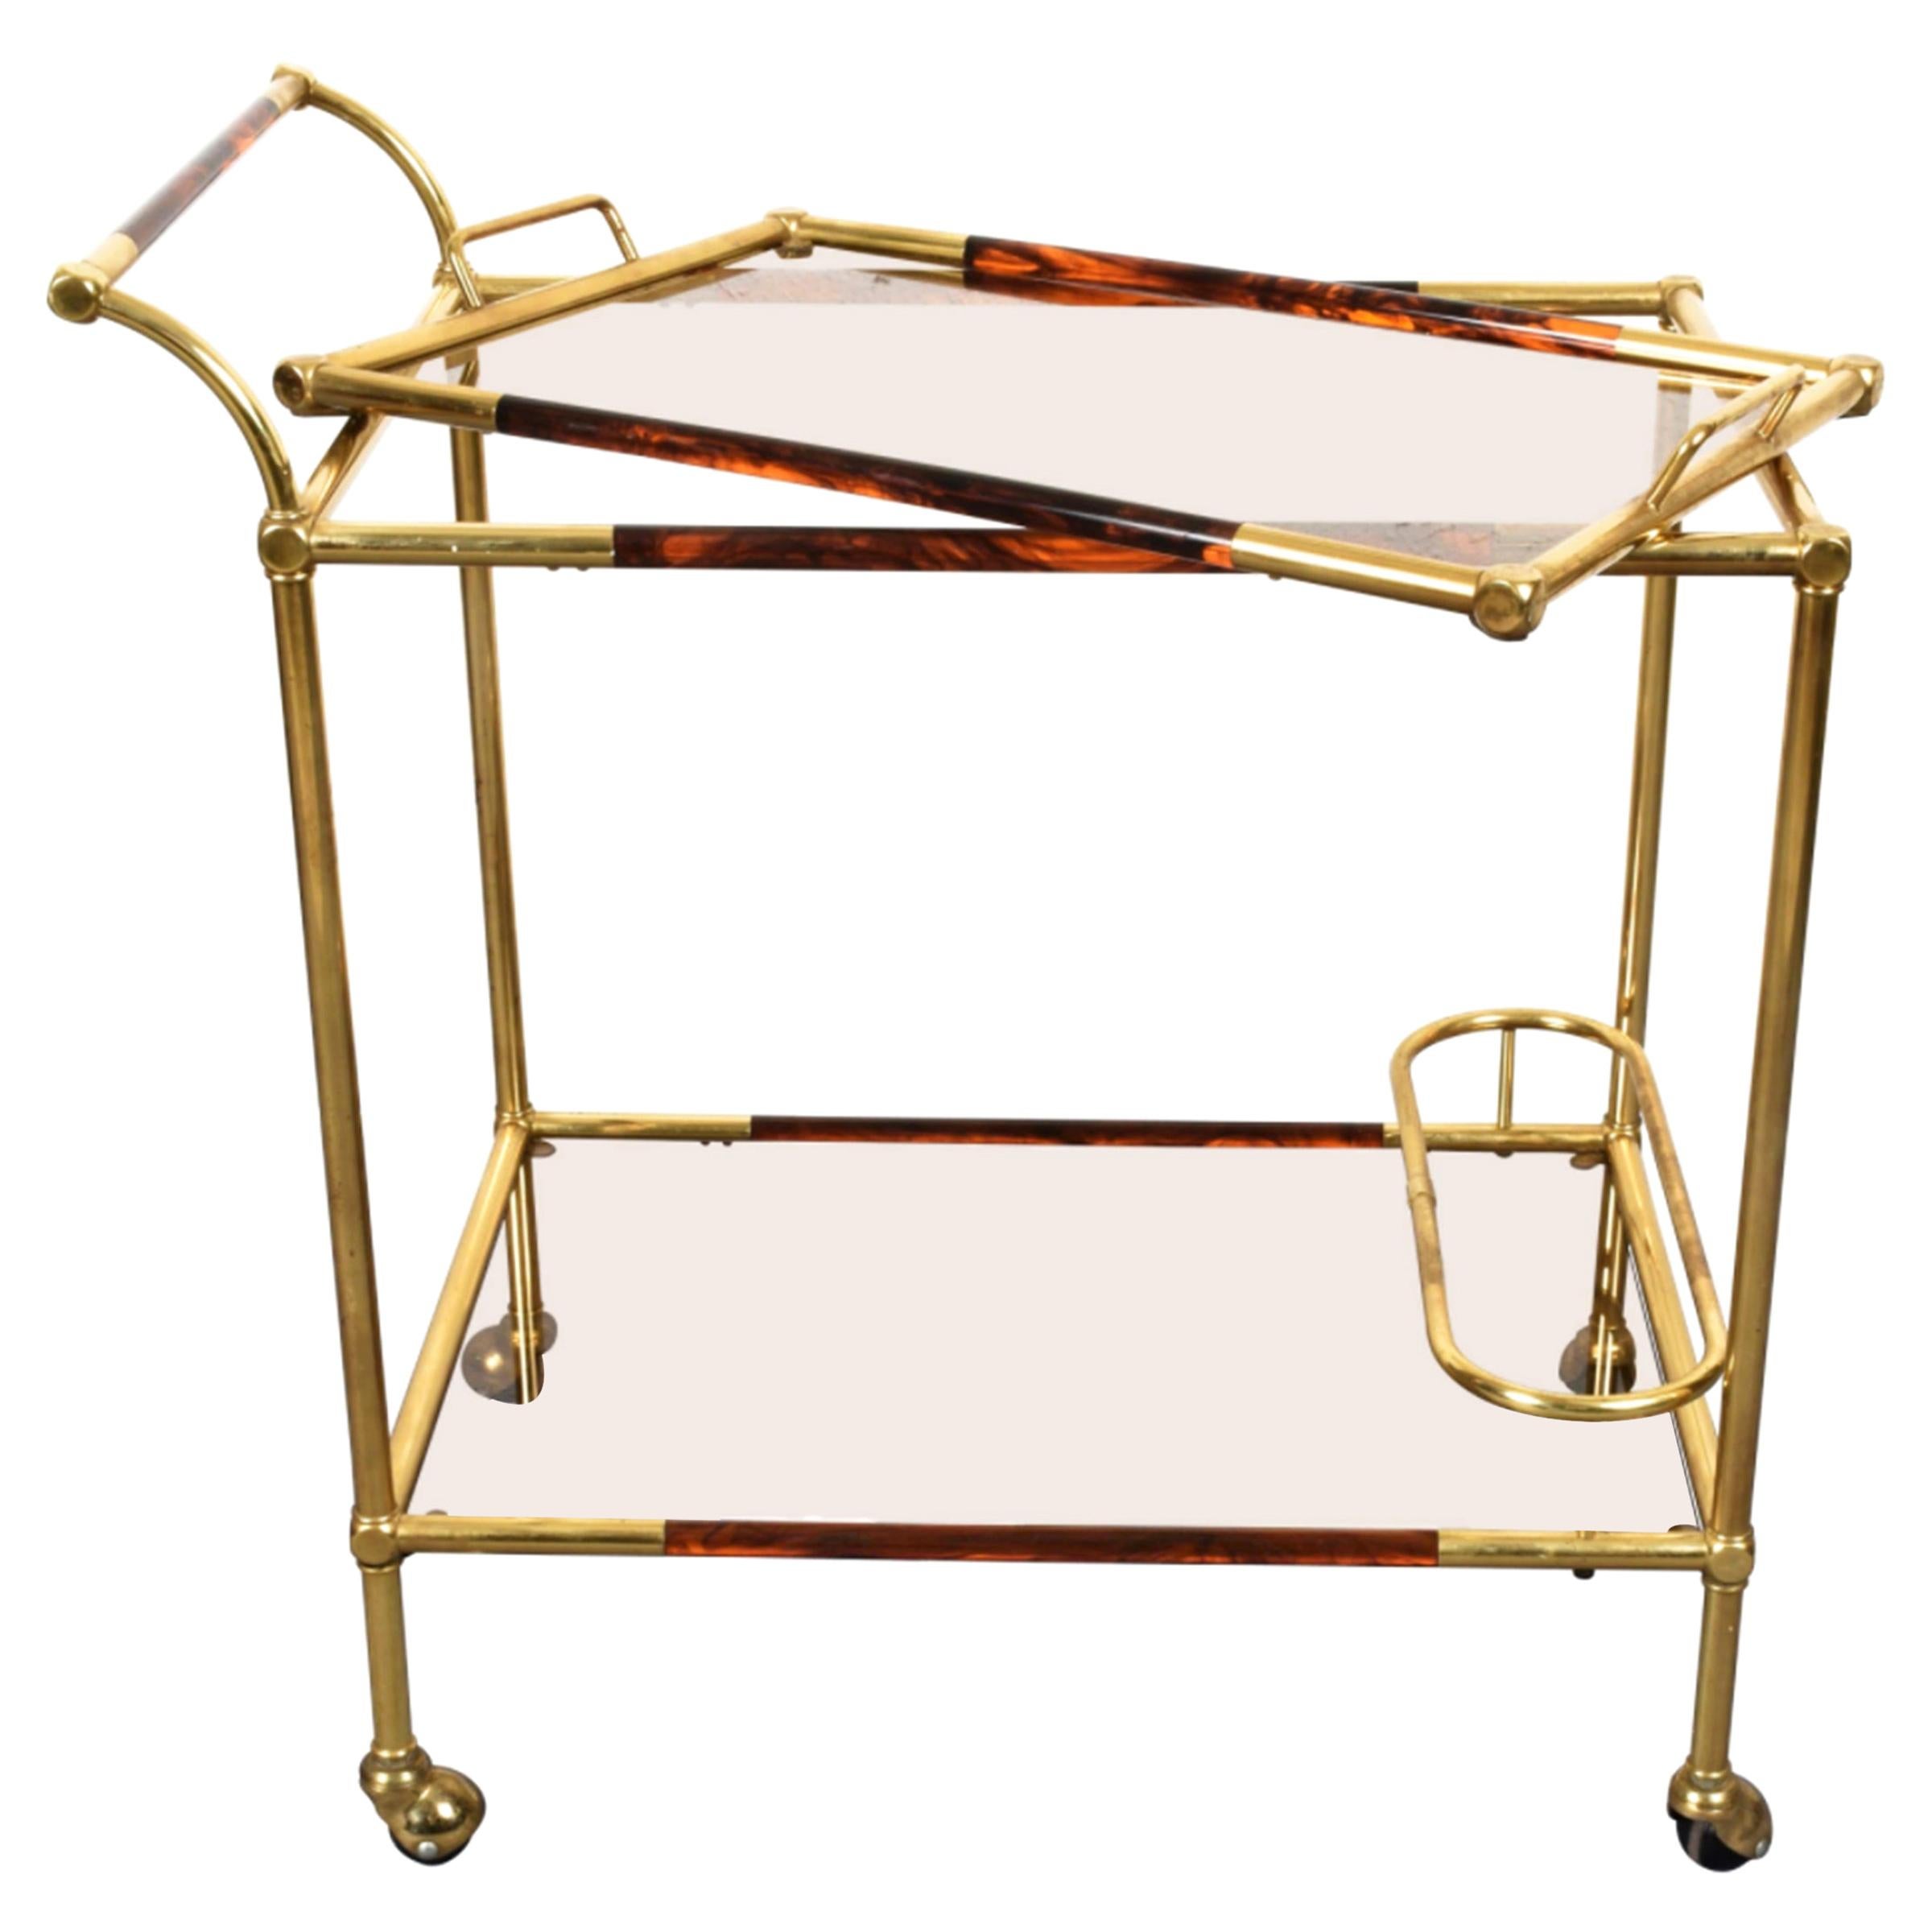 Midcentury Willy Rizzo Brass and Lucite Italian Trolley with Service Tray, 1980s